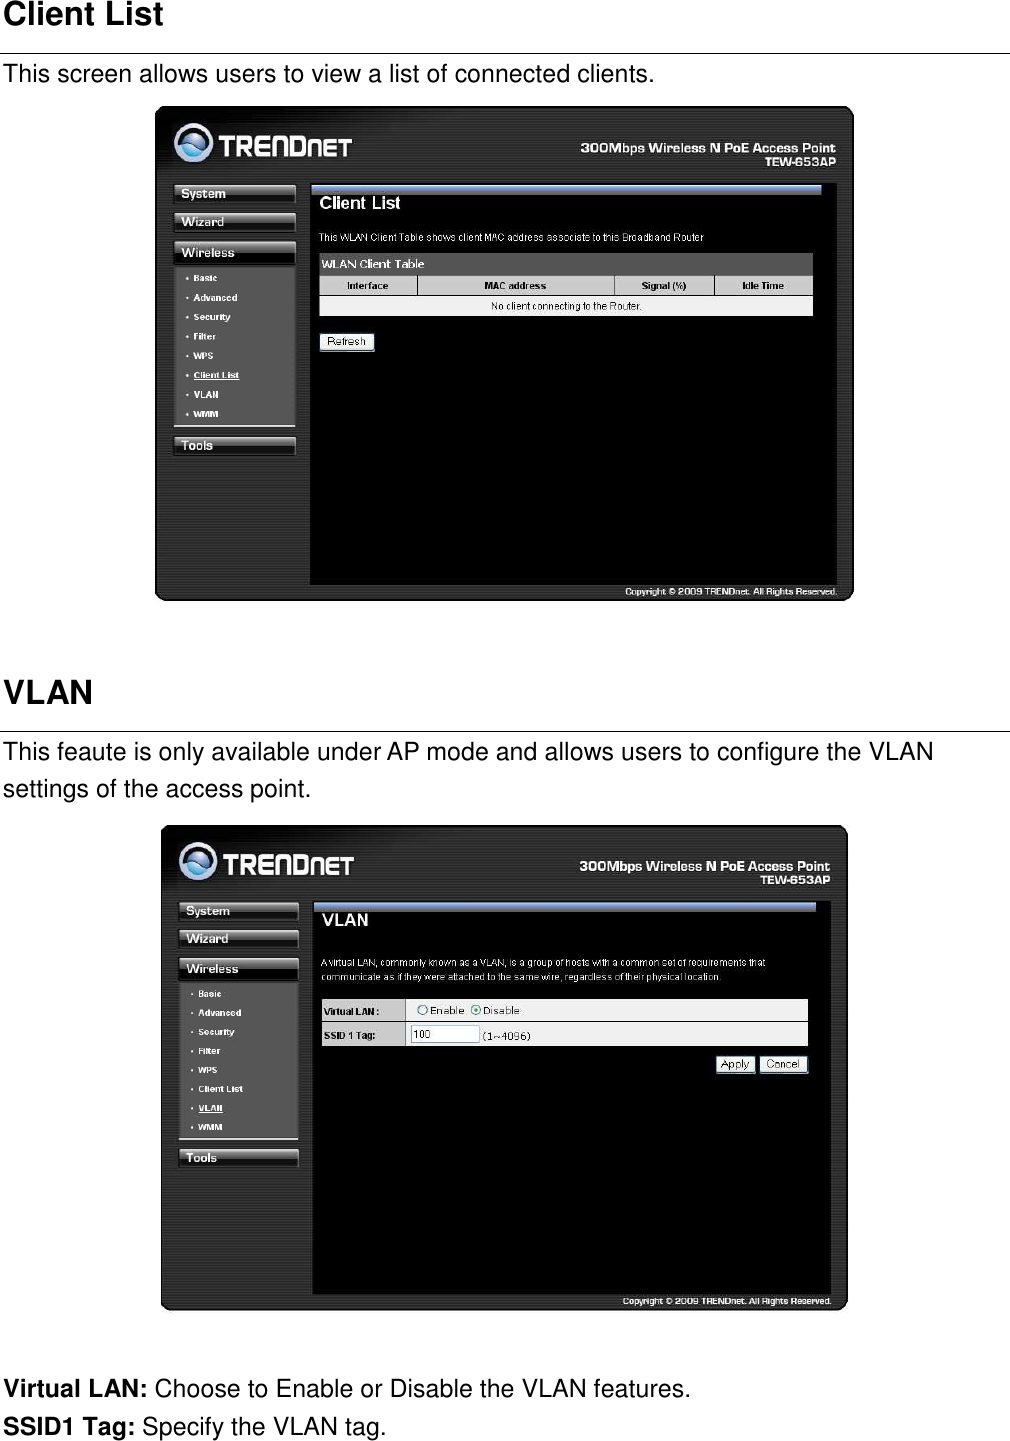 Client List This screen allows users to view a list of connected clients.     VLAN   This feaute is only available under AP mode and allows users to configure the VLAN settings of the access point.   Virtual LAN: Choose to Enable or Disable the VLAN features.   SSID1 Tag: Specify the VLAN tag.    